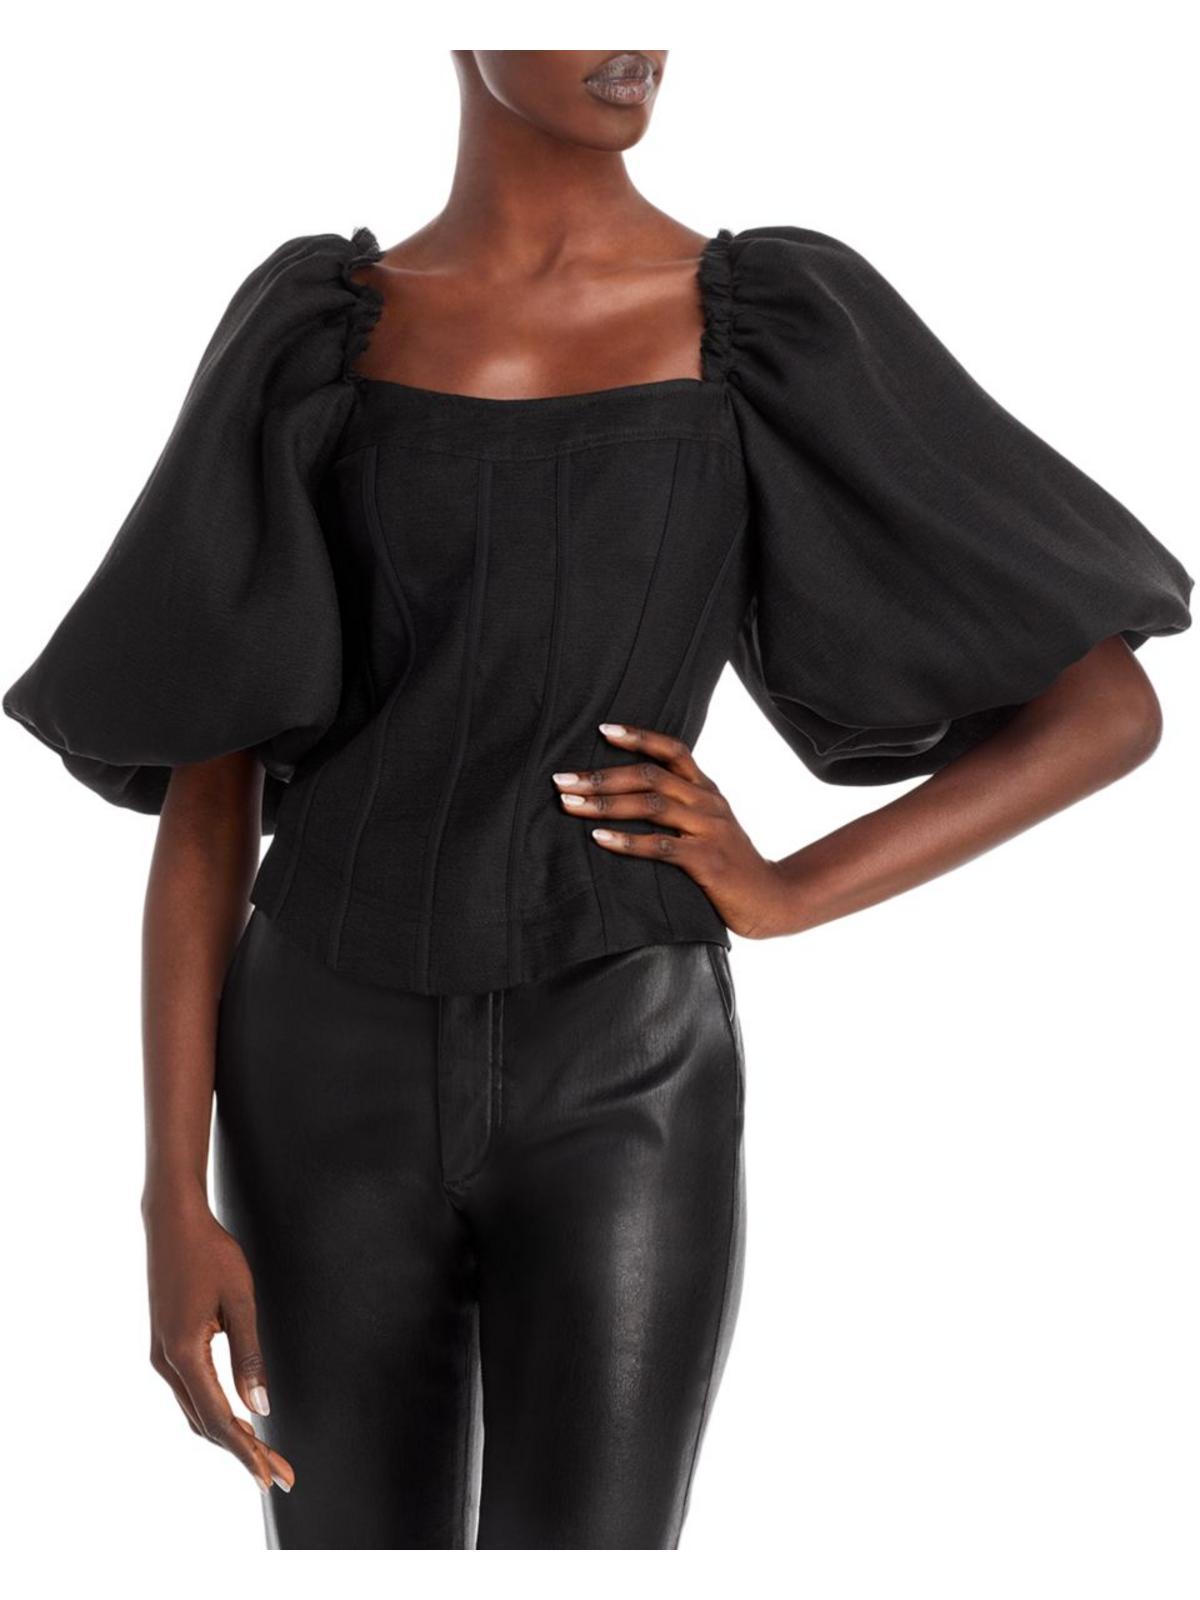 Aje. Corset Seamed Puff Sleeves Cropped in Black